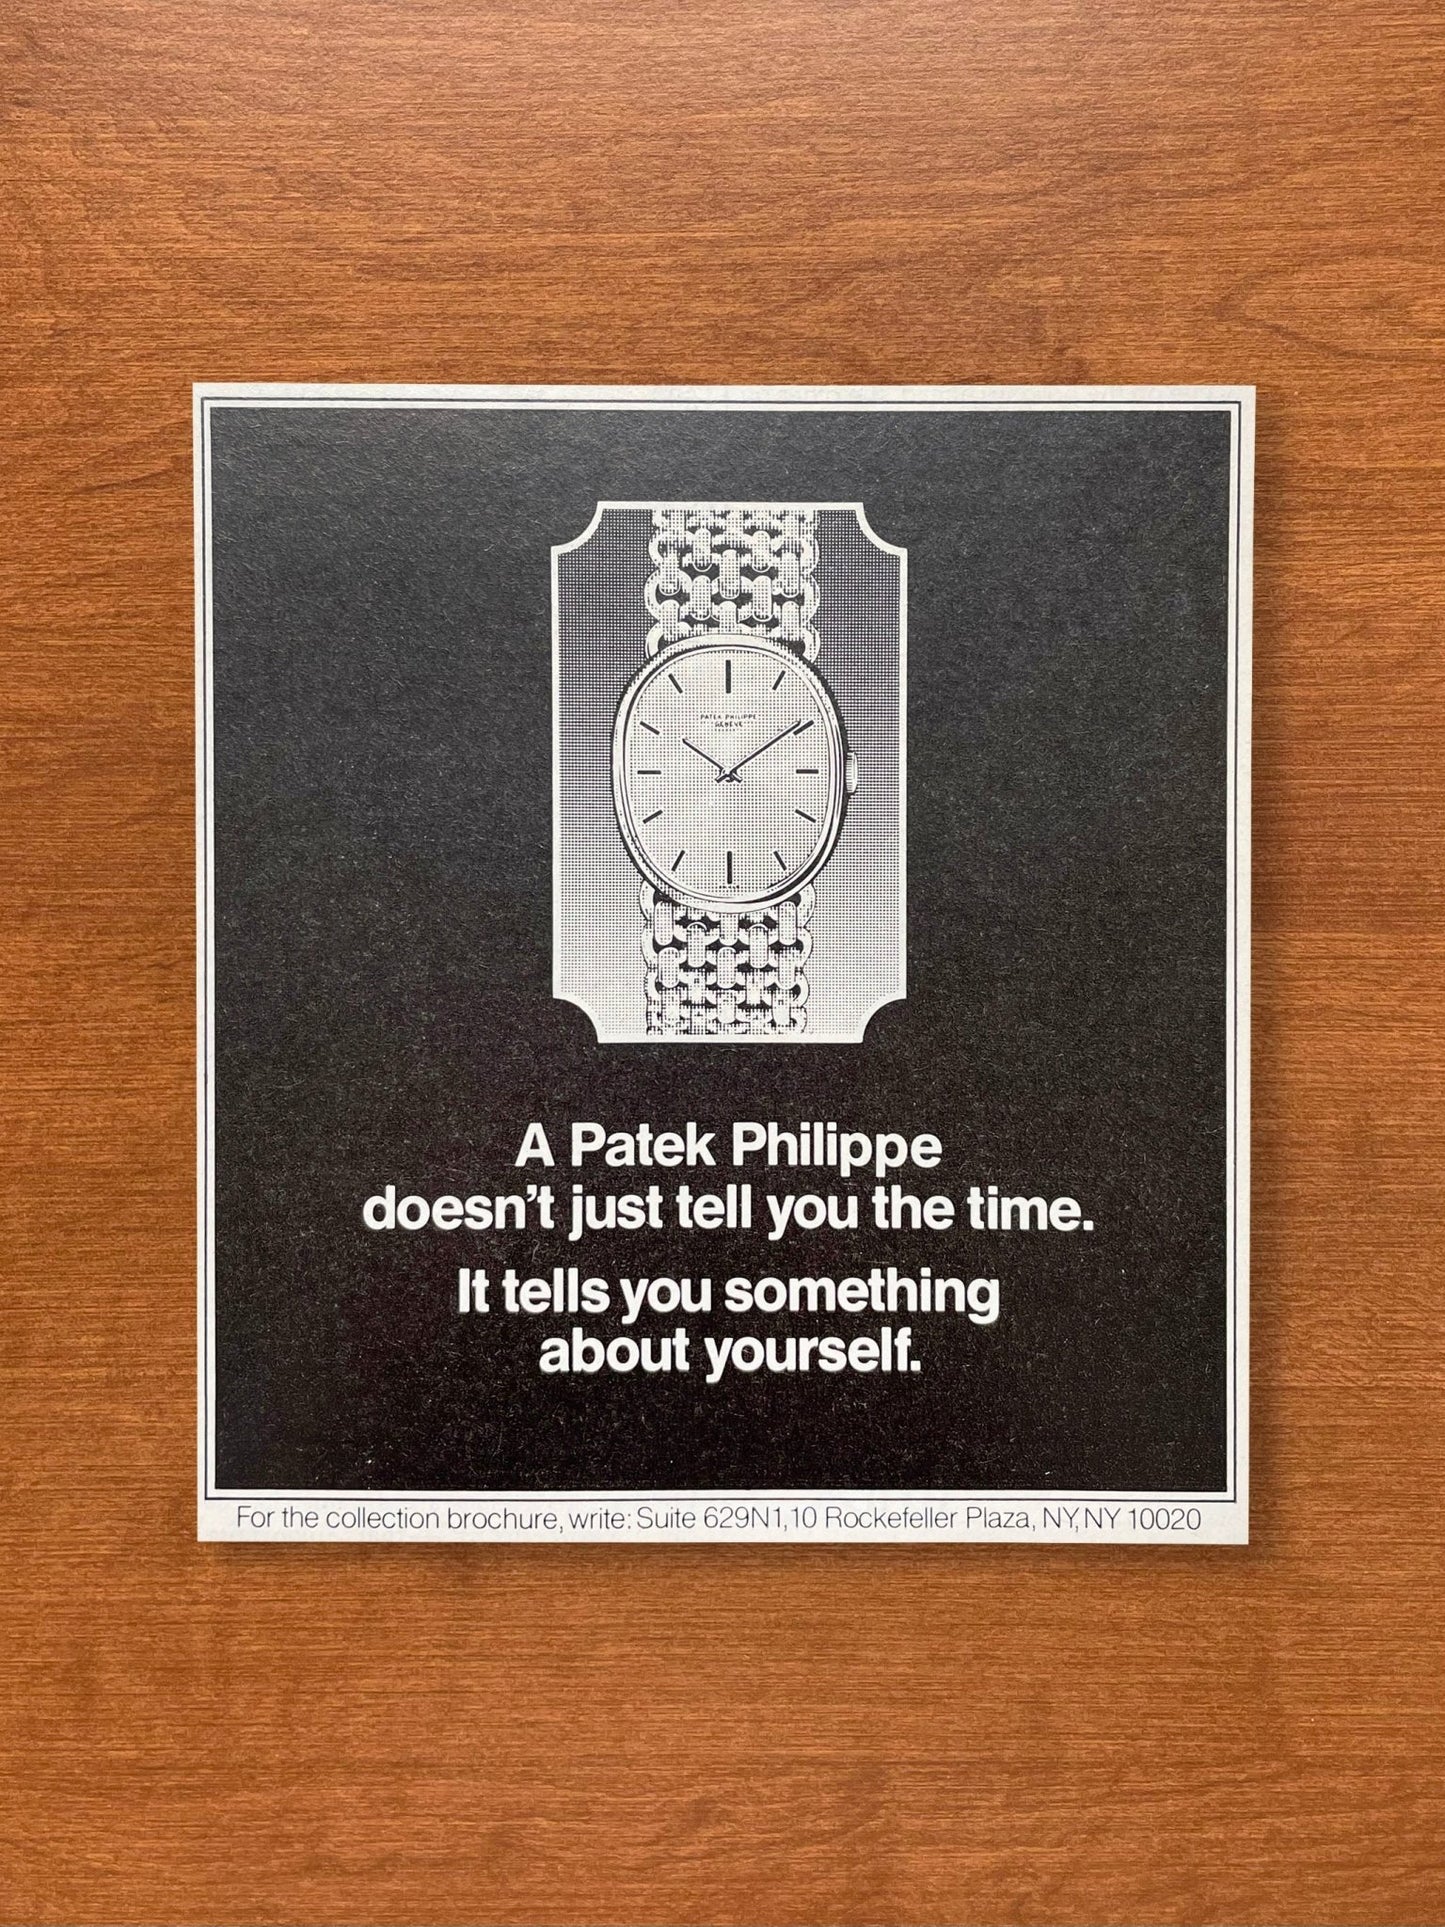 1978 Patek Philippe Ellipse "tells you something about yourself." Advertisement